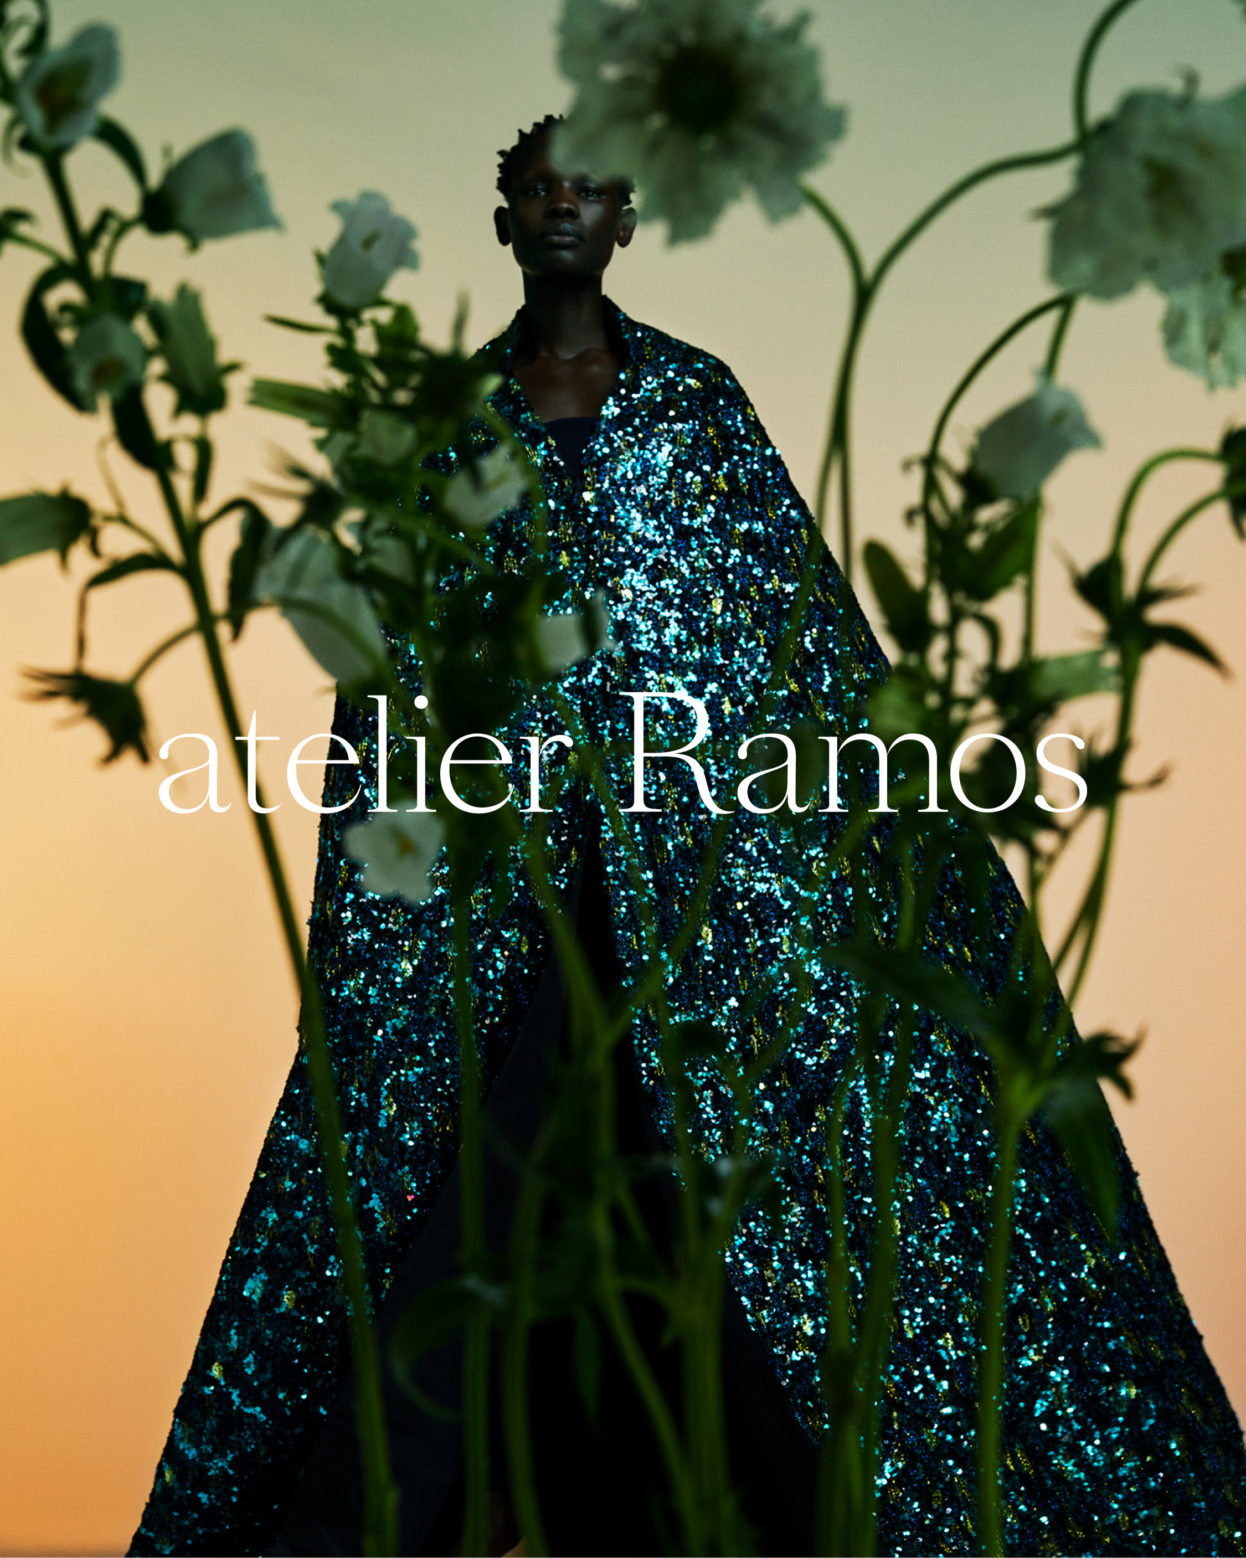 FOLCH - atelier Ramos, an exercise in natural evolution